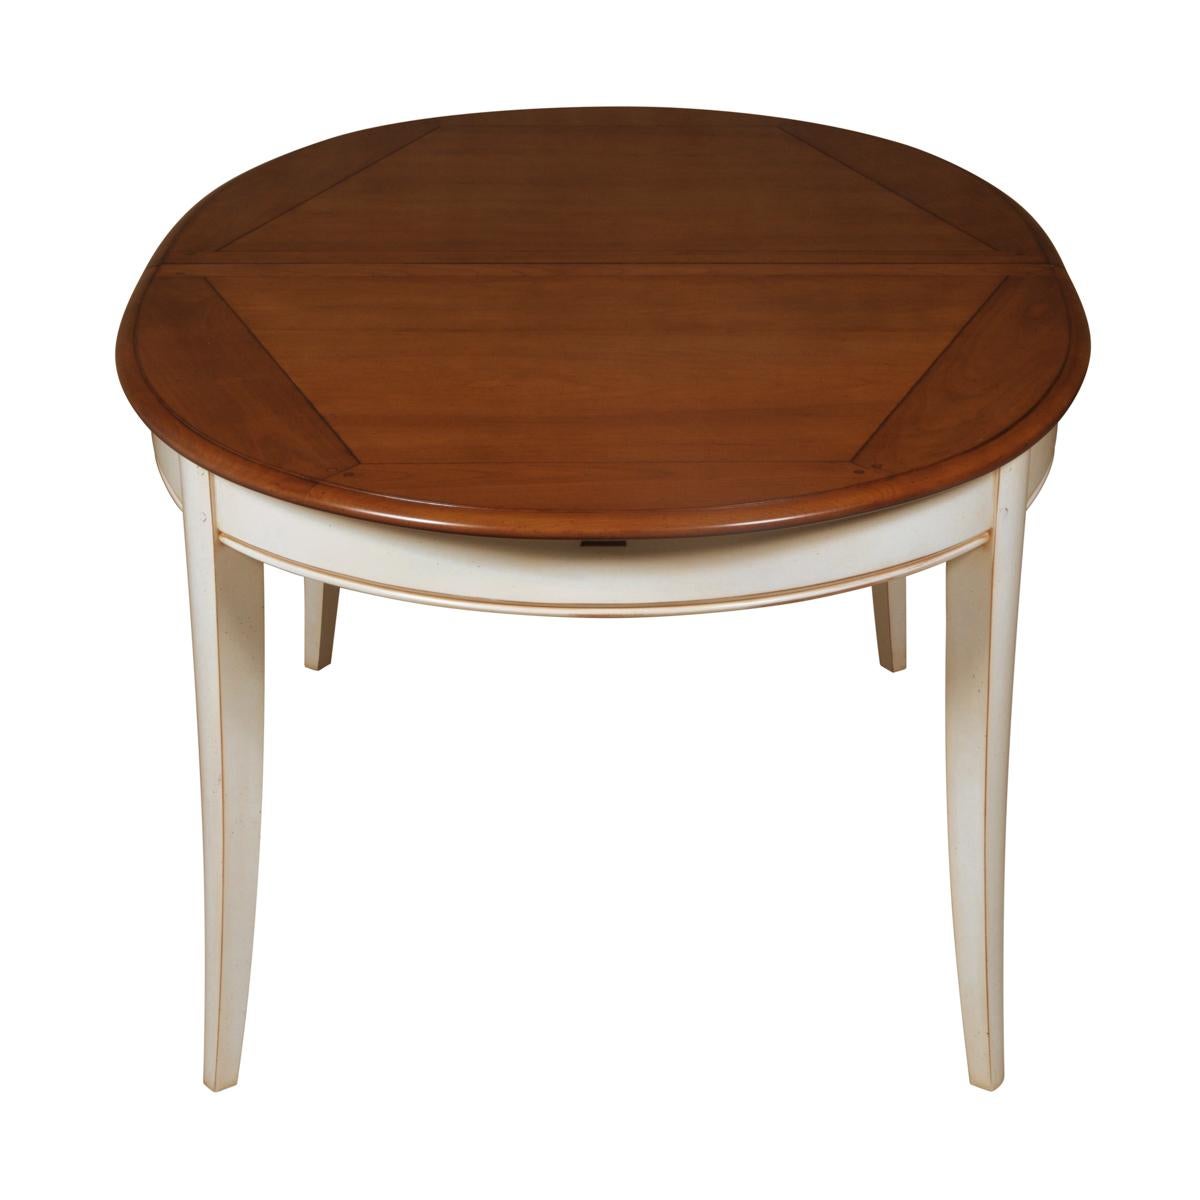 Contemporary French Provincial Style Extensible Oval Table with a Light White Cream Finish For Sale